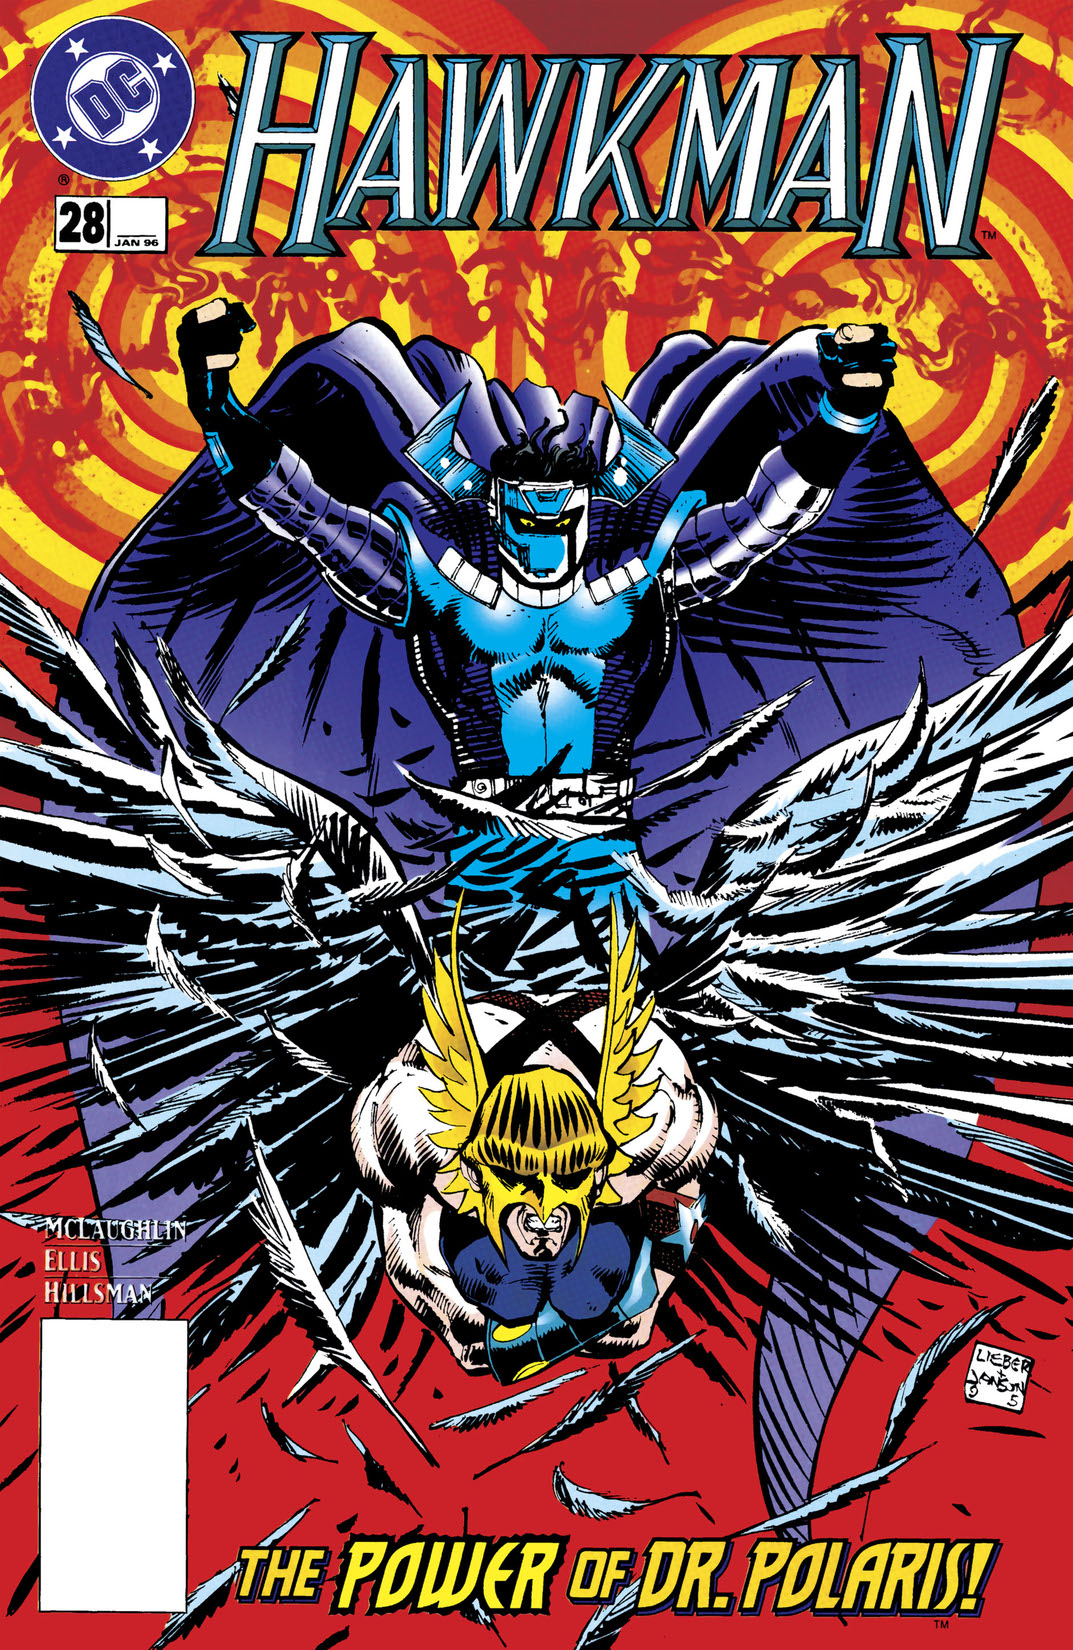 Hawkman (1993-1996) #28 preview images